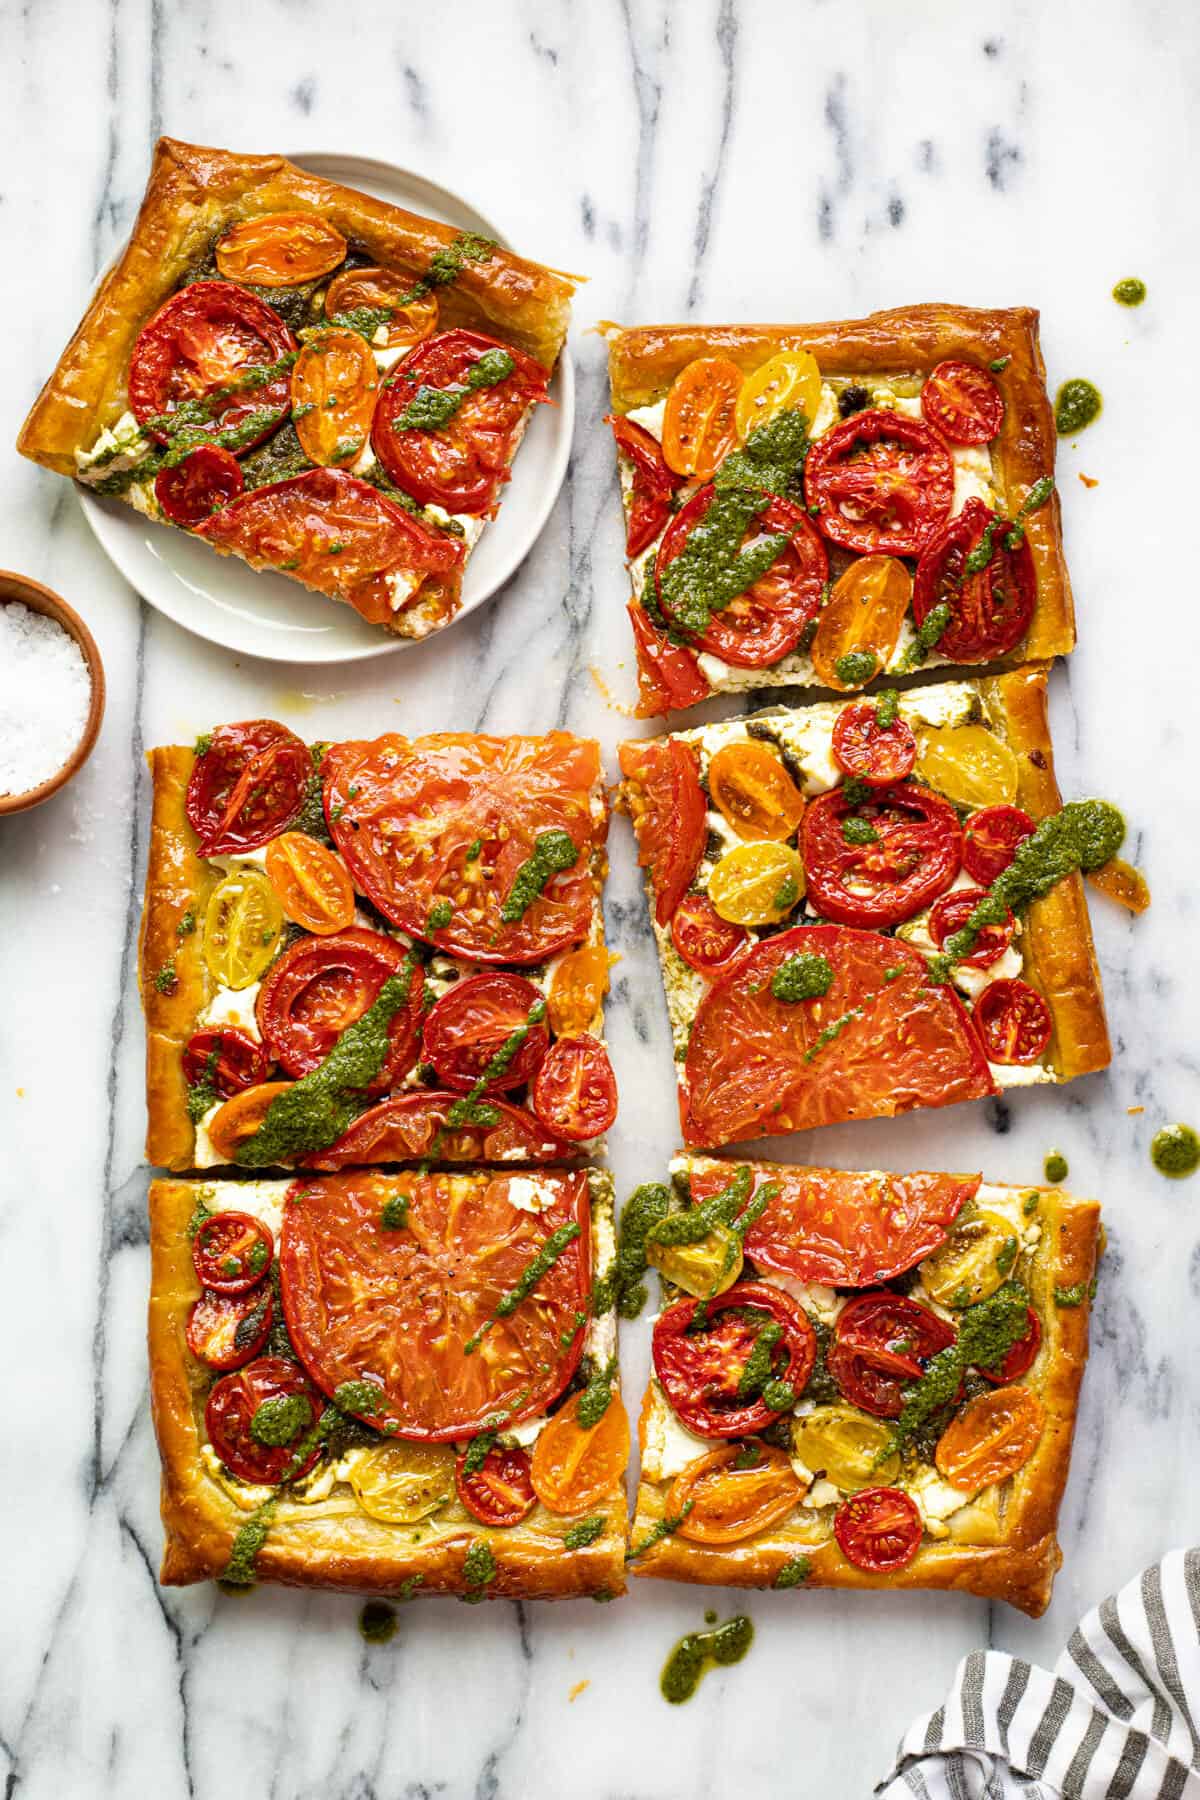 A rectangular puff pastry tomato tart sliced into 6 pieces with 1 piece on a plate.